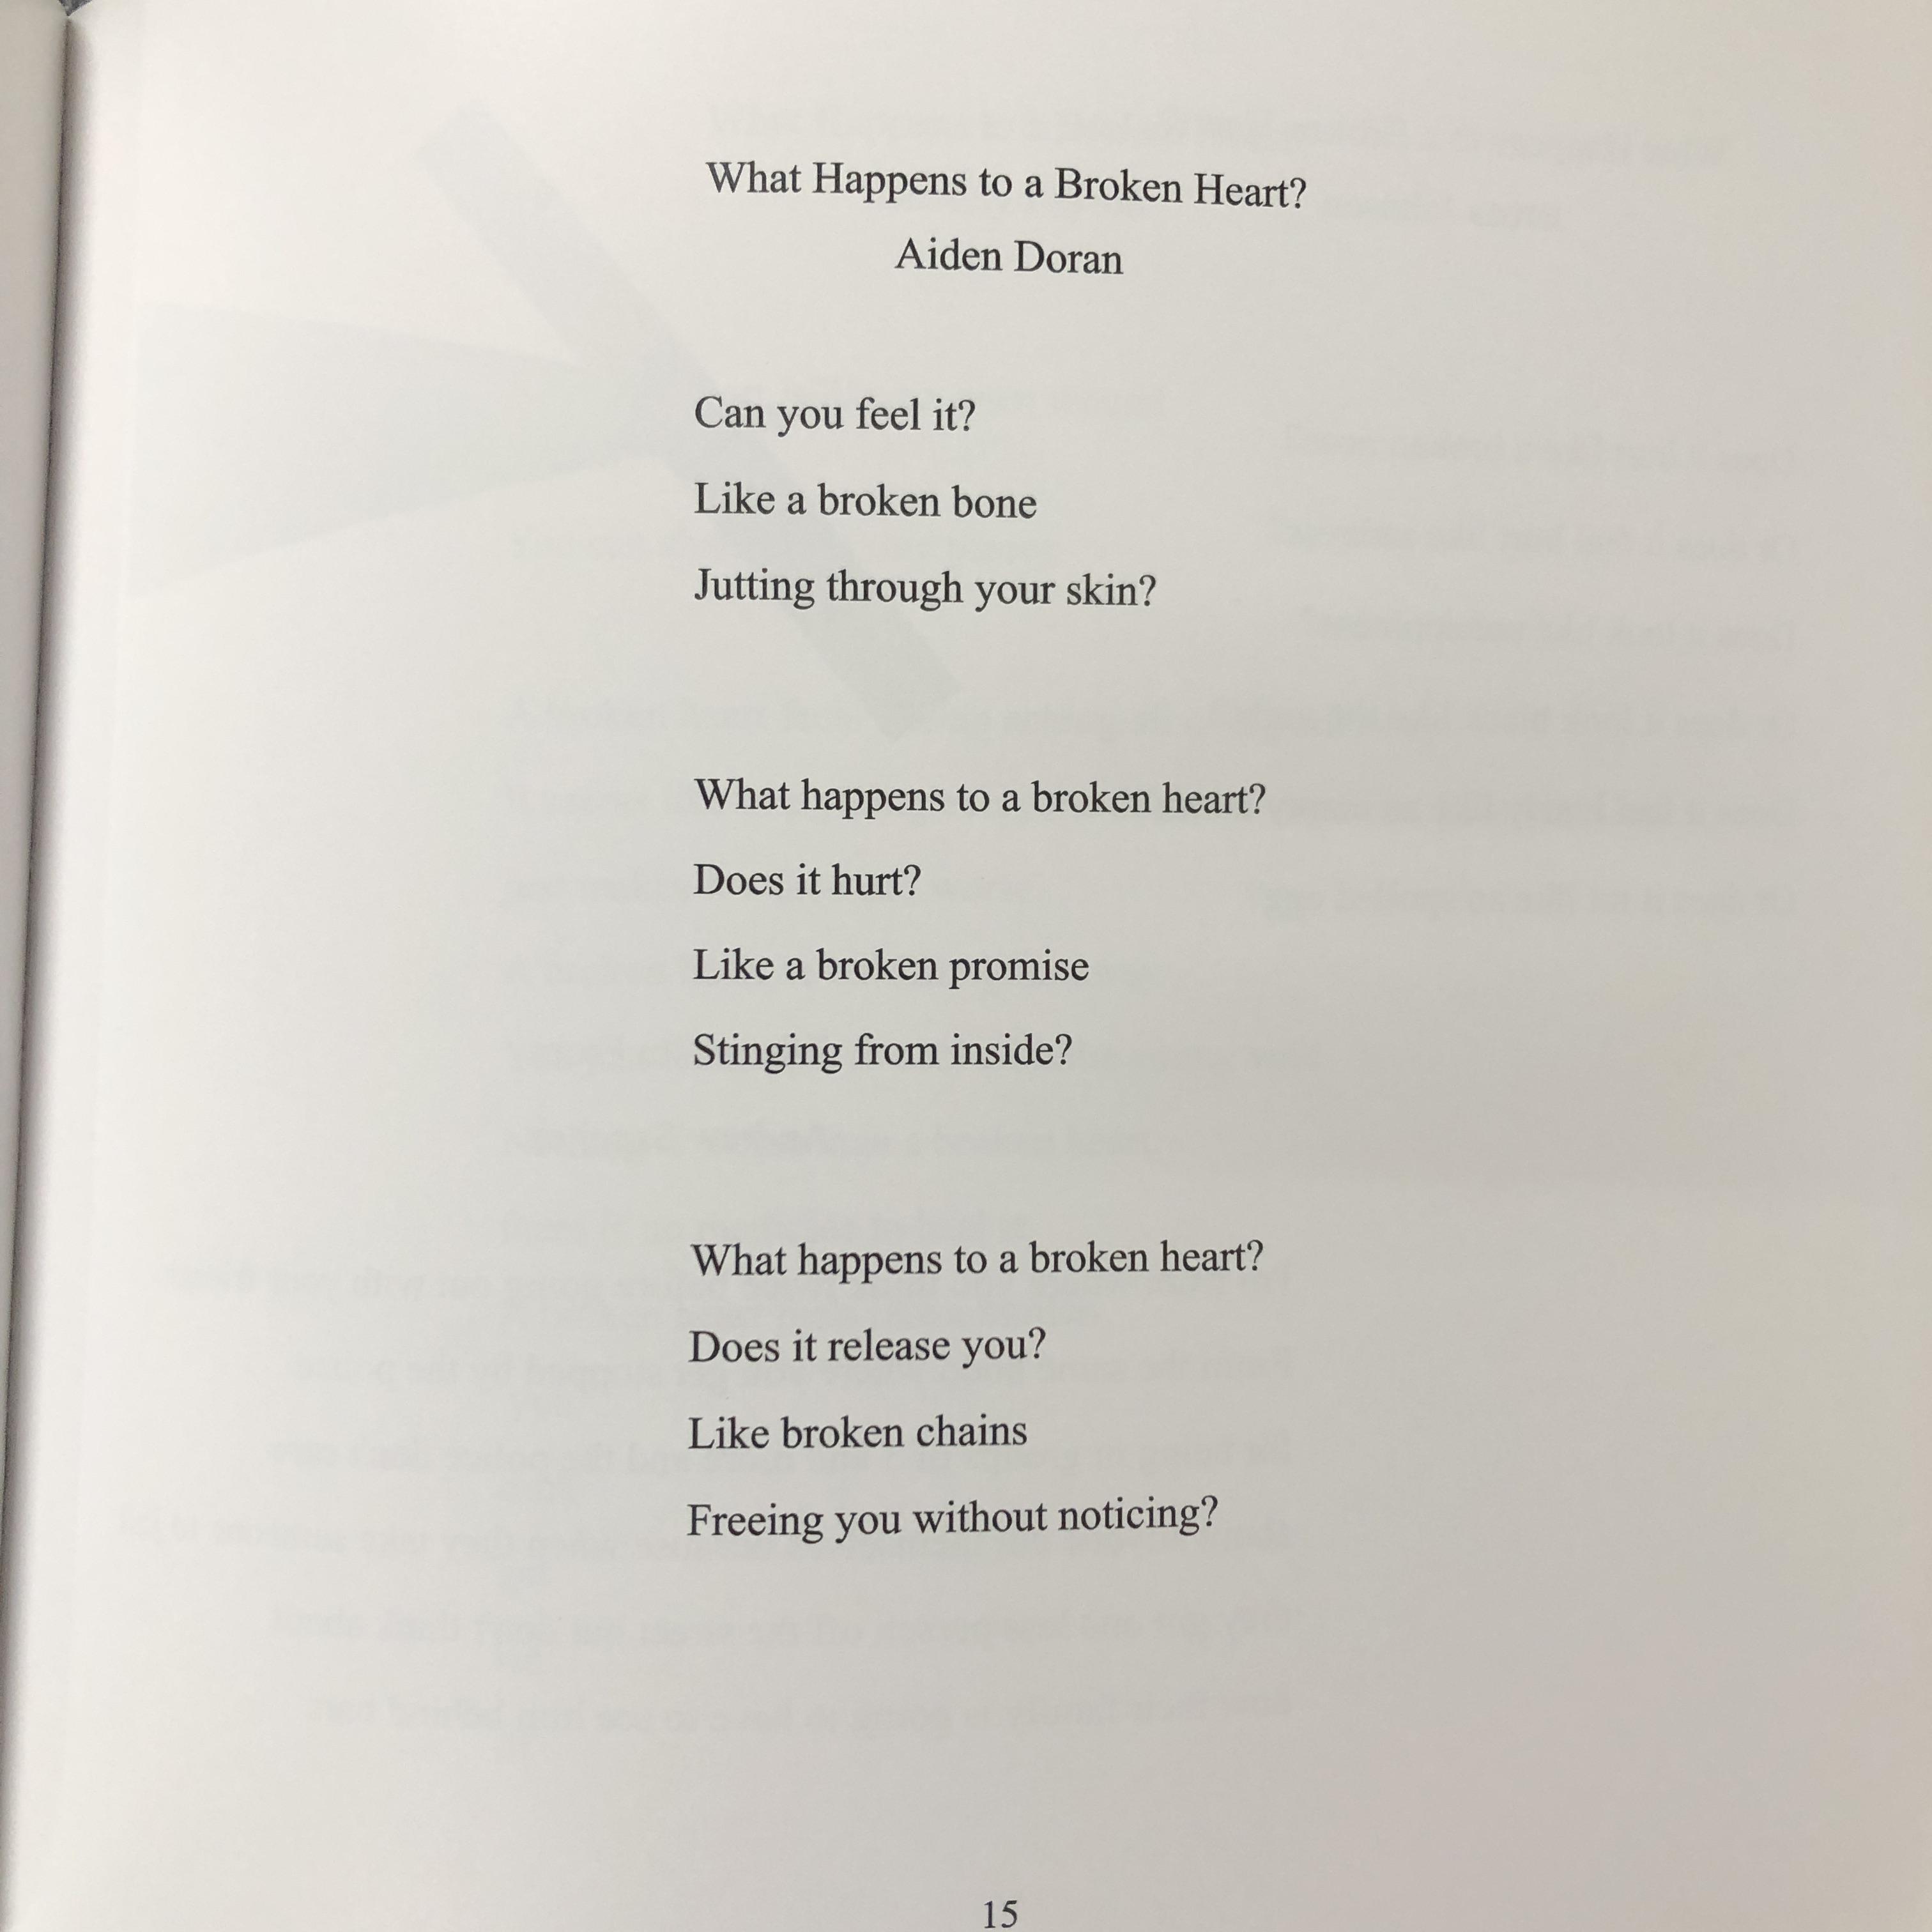 a poem titled "What Happens to a Broken Heart?" by student Aiden Doran